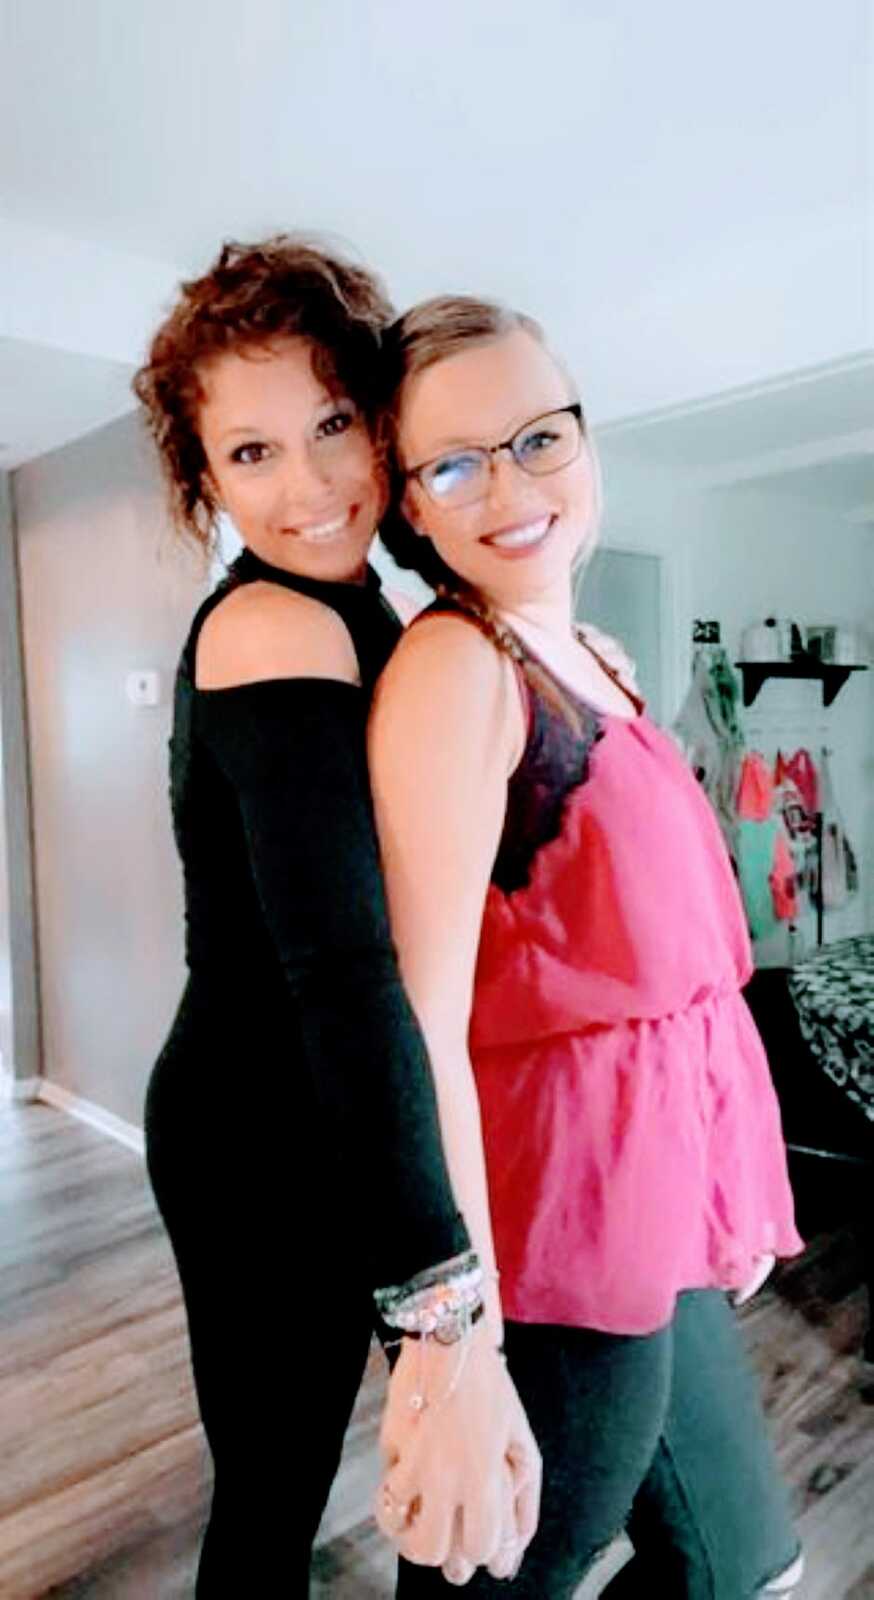 Two mom and co-parents take a cute selfie together, both dressed up for a girls' night out